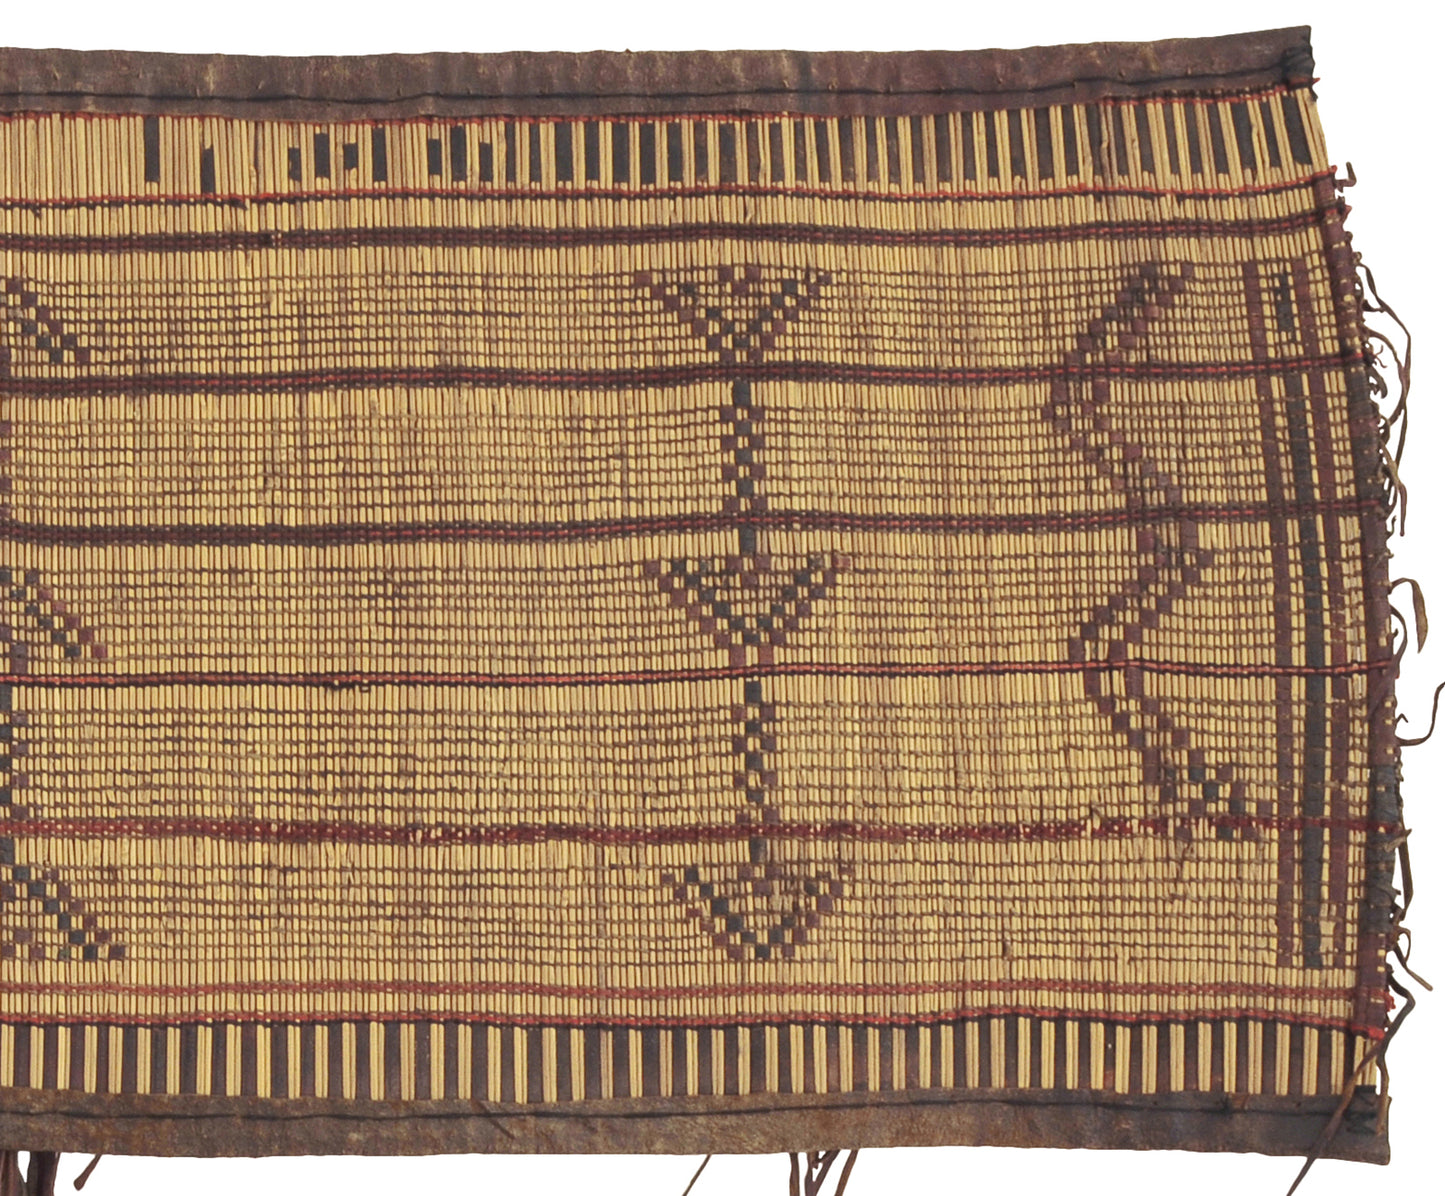 Authentic Tuareg Straw Mat from Niger - A Cultural African Artifact from Sahara